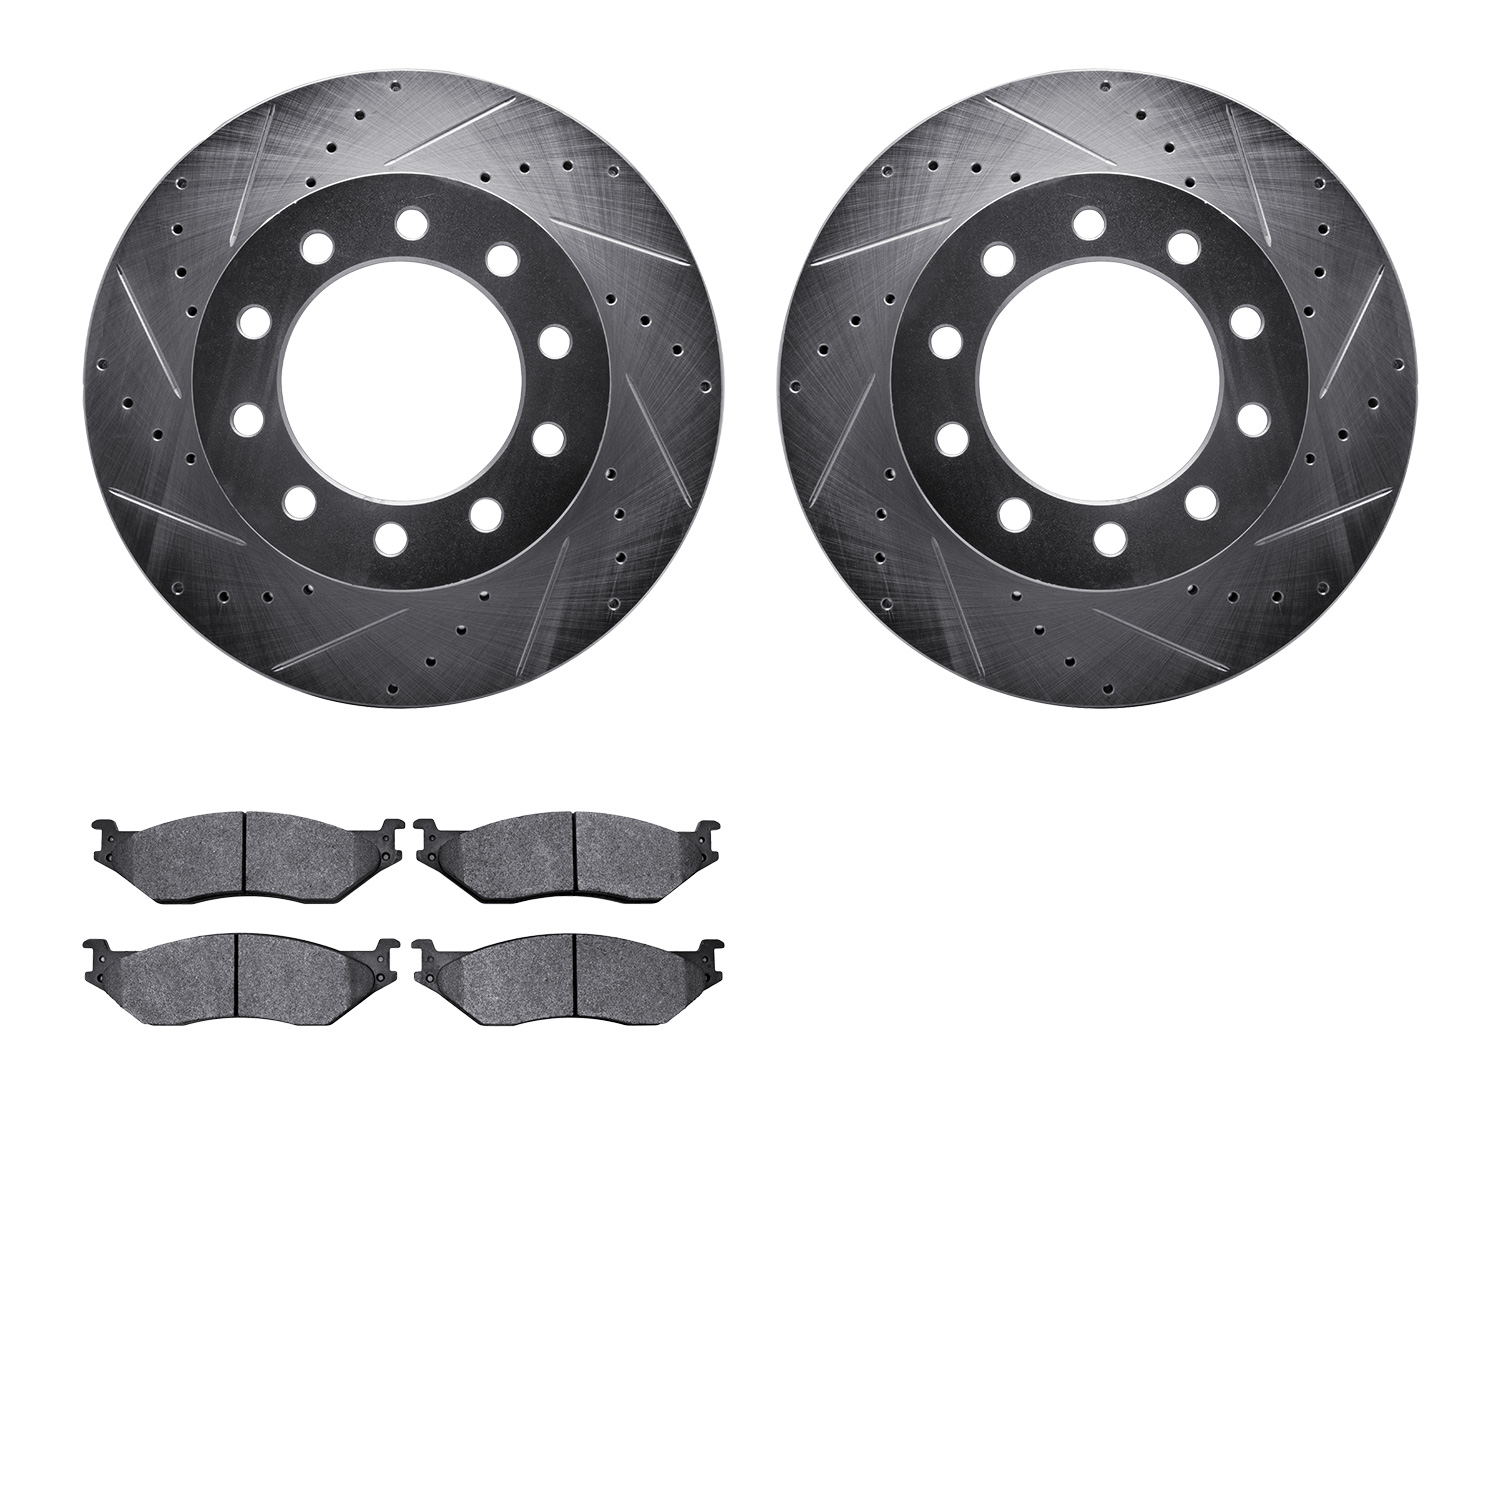 7402-54079 Drilled/Slotted Brake Rotors with Ultimate-Duty Brake Pads Kit [Silver], 2005-2016 Ford/Lincoln/Mercury/Mazda, Positi